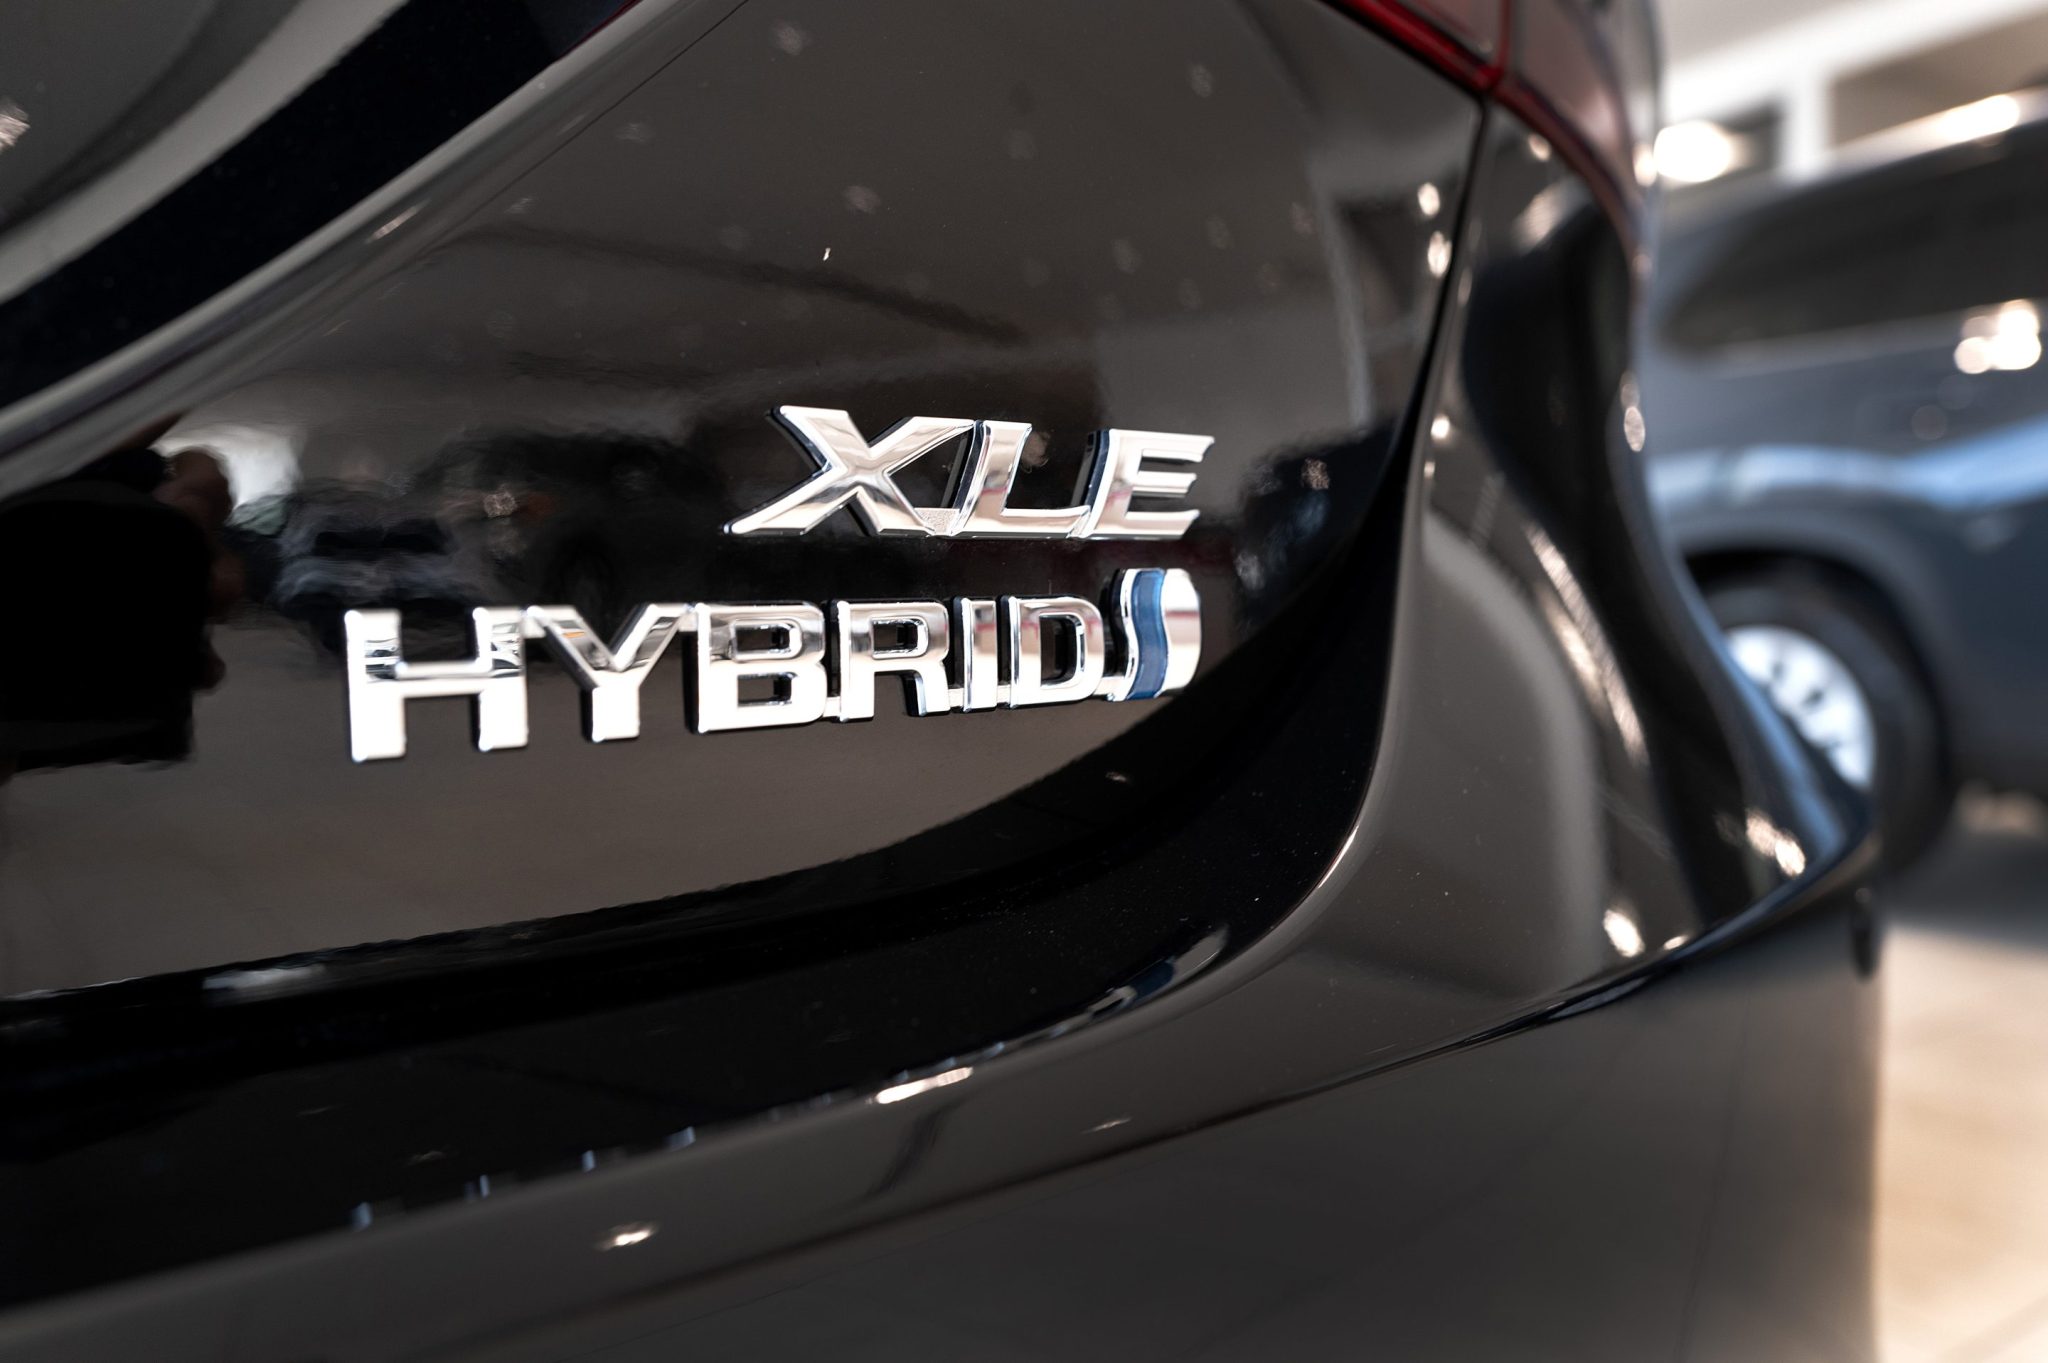 Electric vehicles are creating a ‘halo effect’ for hybrids—and losing prospective customers to them